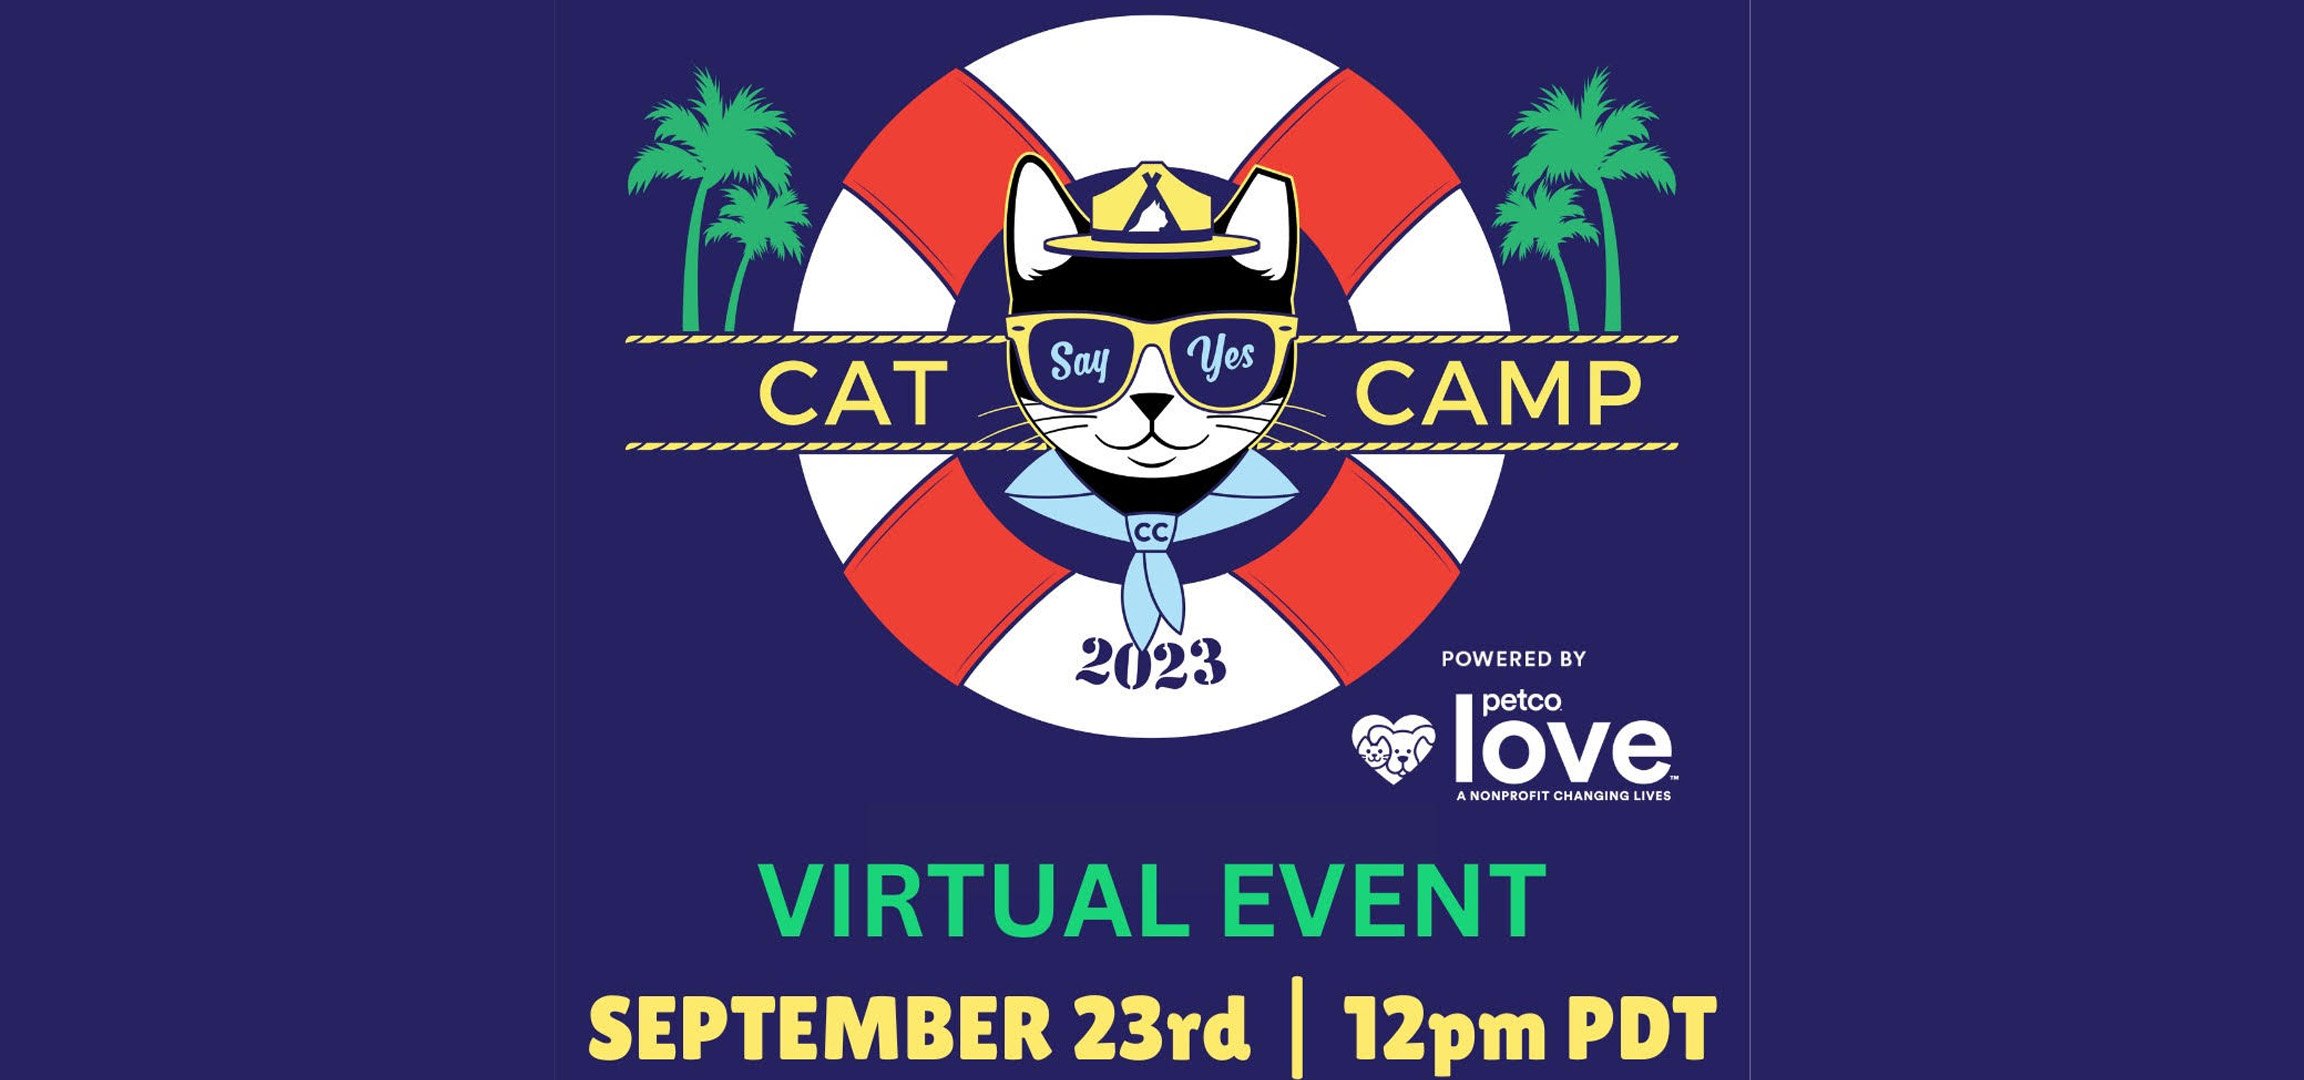 Cat lovers to gather at Cat Camp this weekend; meet 'The Cat Daddy' and  'Kitten Lady' - The San Diego Union-Tribune